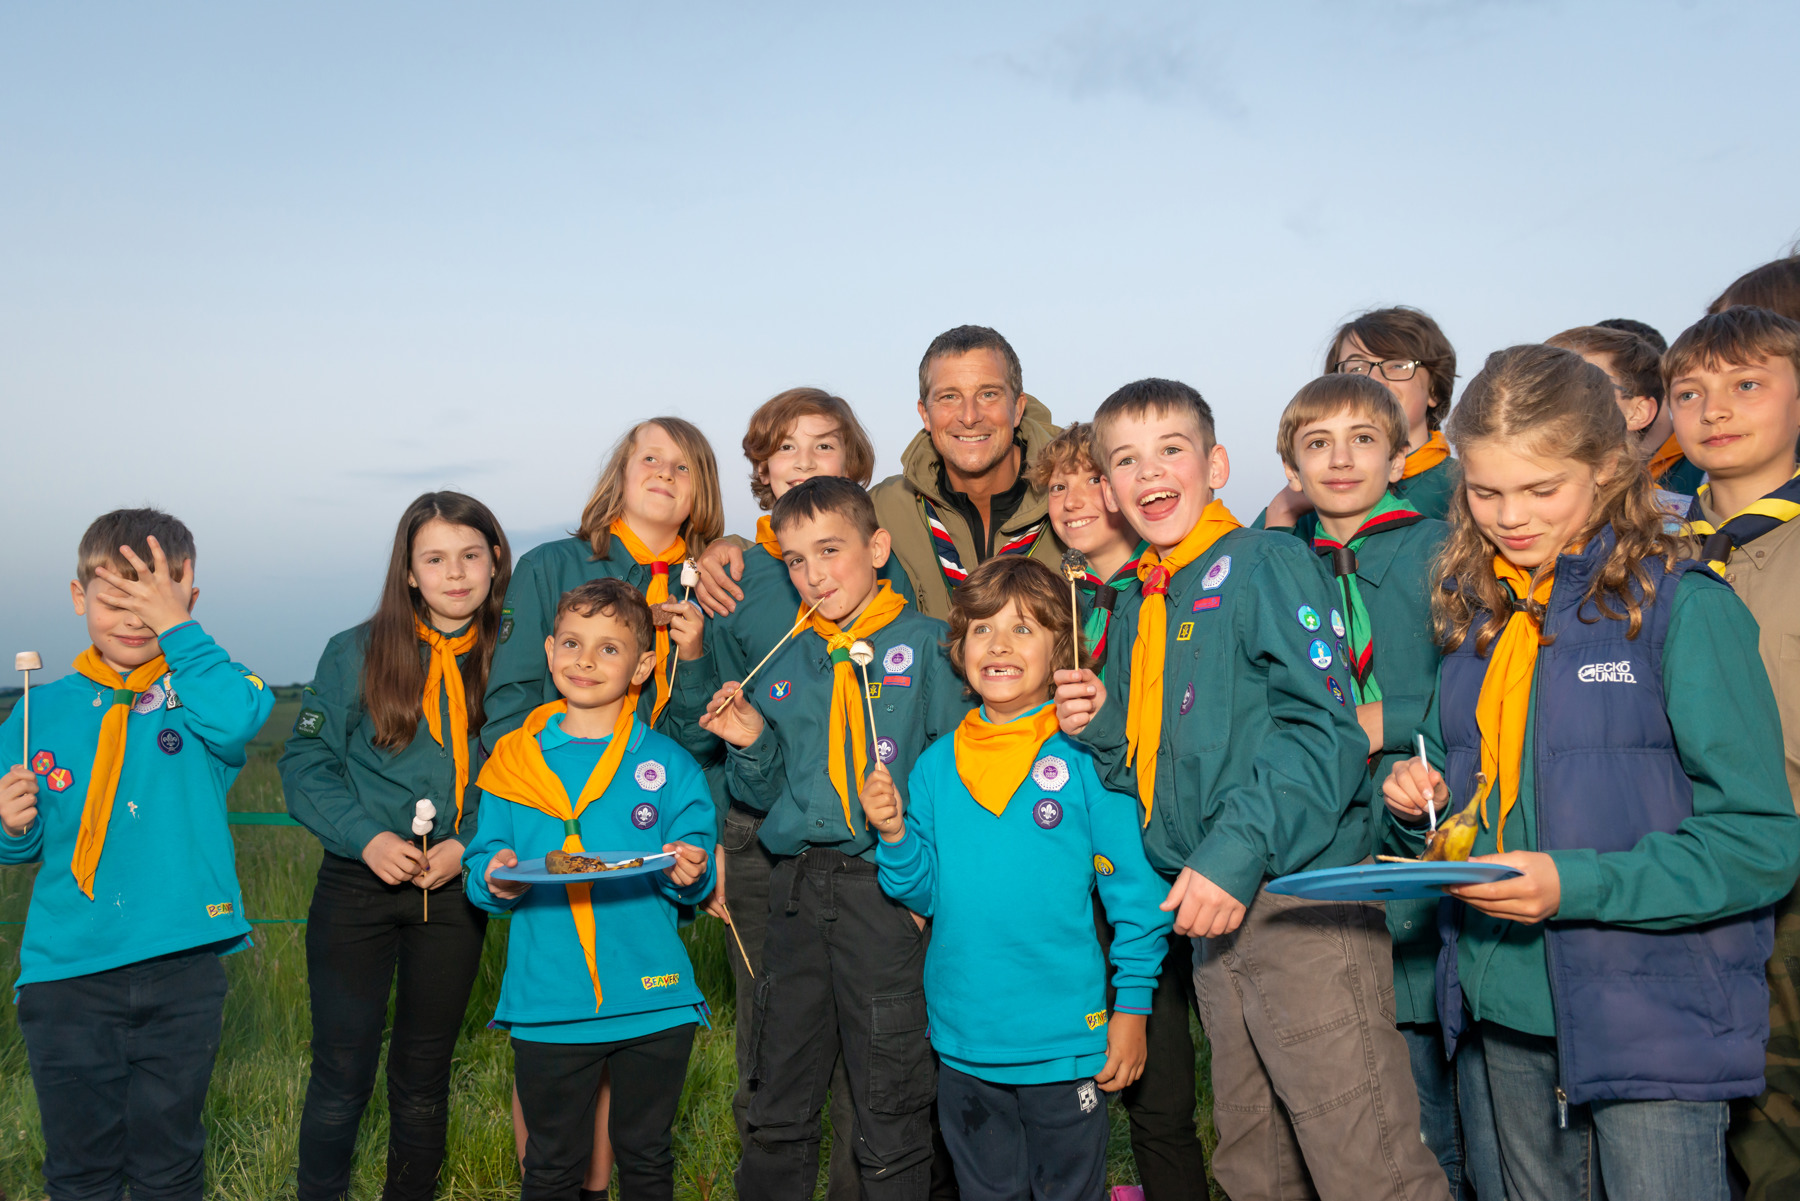 Chief Scout Bear Grylls is standing on grass with a group of Beavers and Cubs. All the Beavers and Cubs are in uniform with yellow neckers, and Bear Grylls is wearing a red navy and white necker. The sky behind them is a grey/blue.